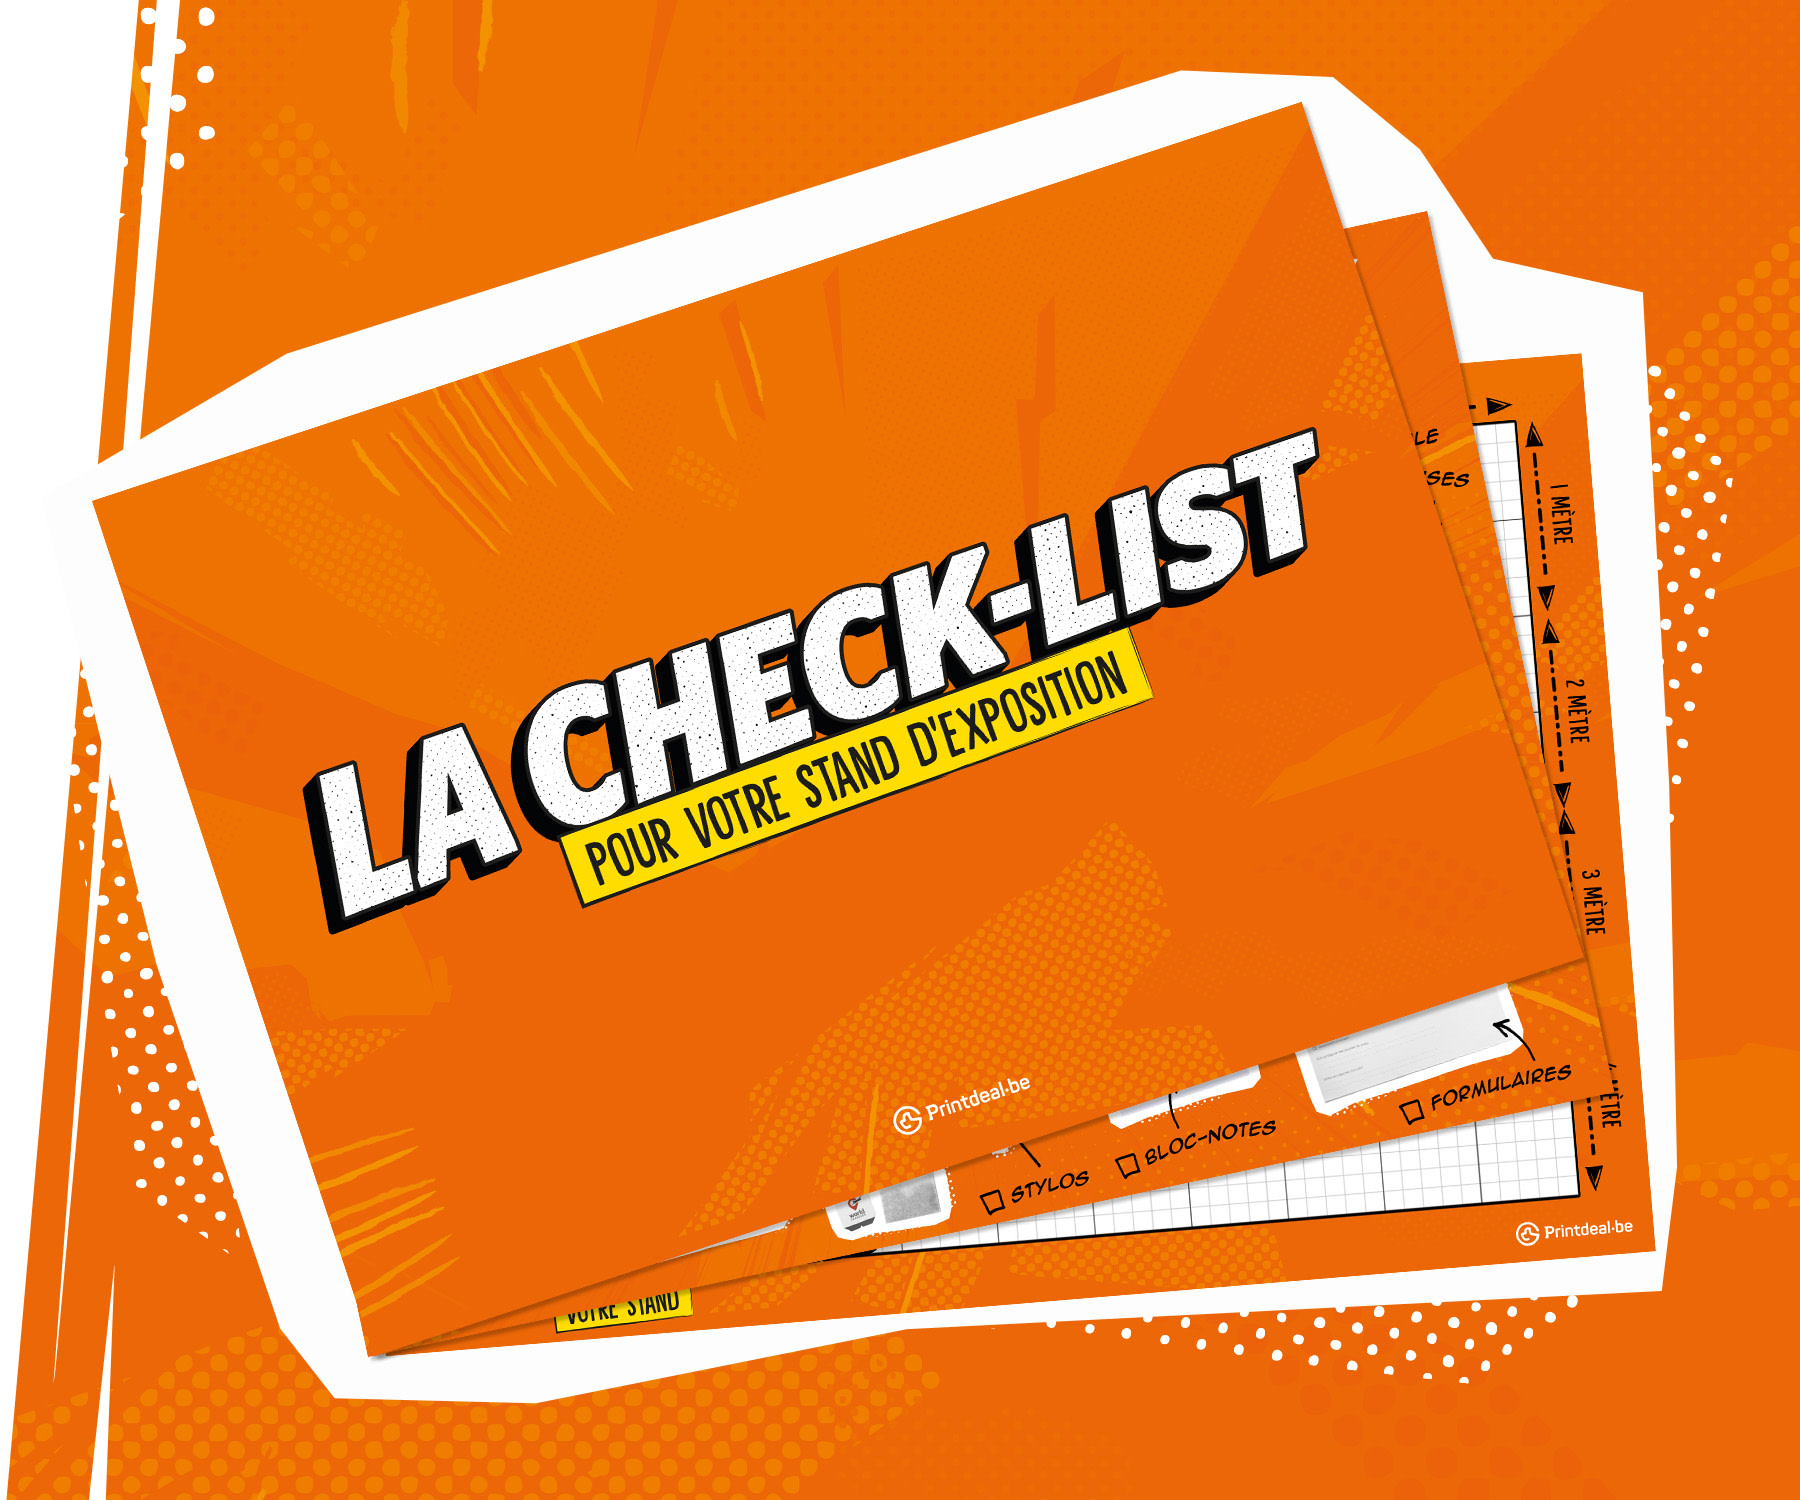 Checklist stand d'expo